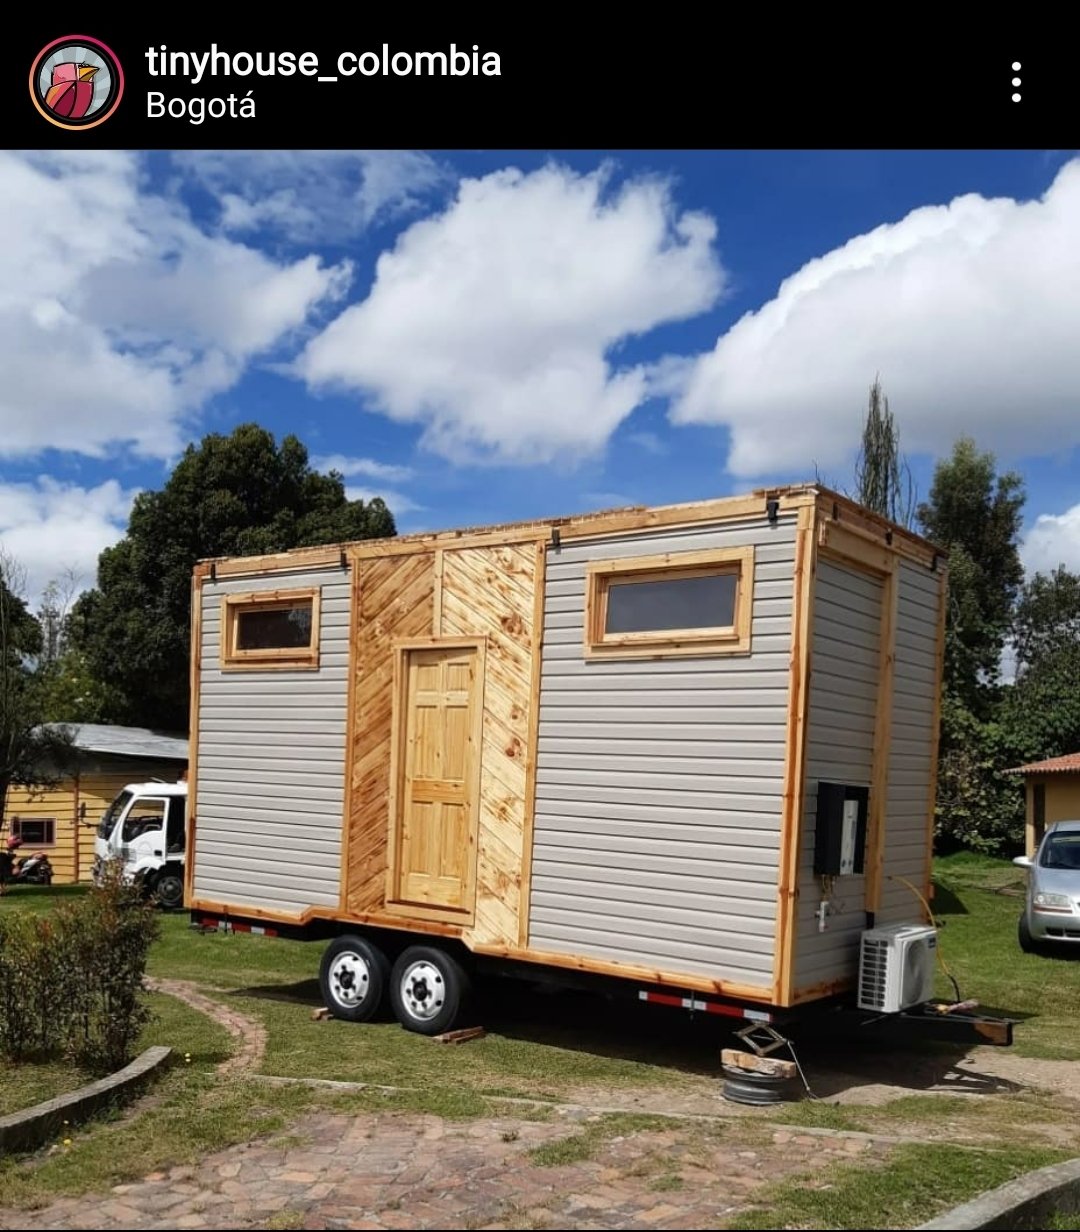 TinyHouse Colombia (@ConstruimosTiny) / Twitter